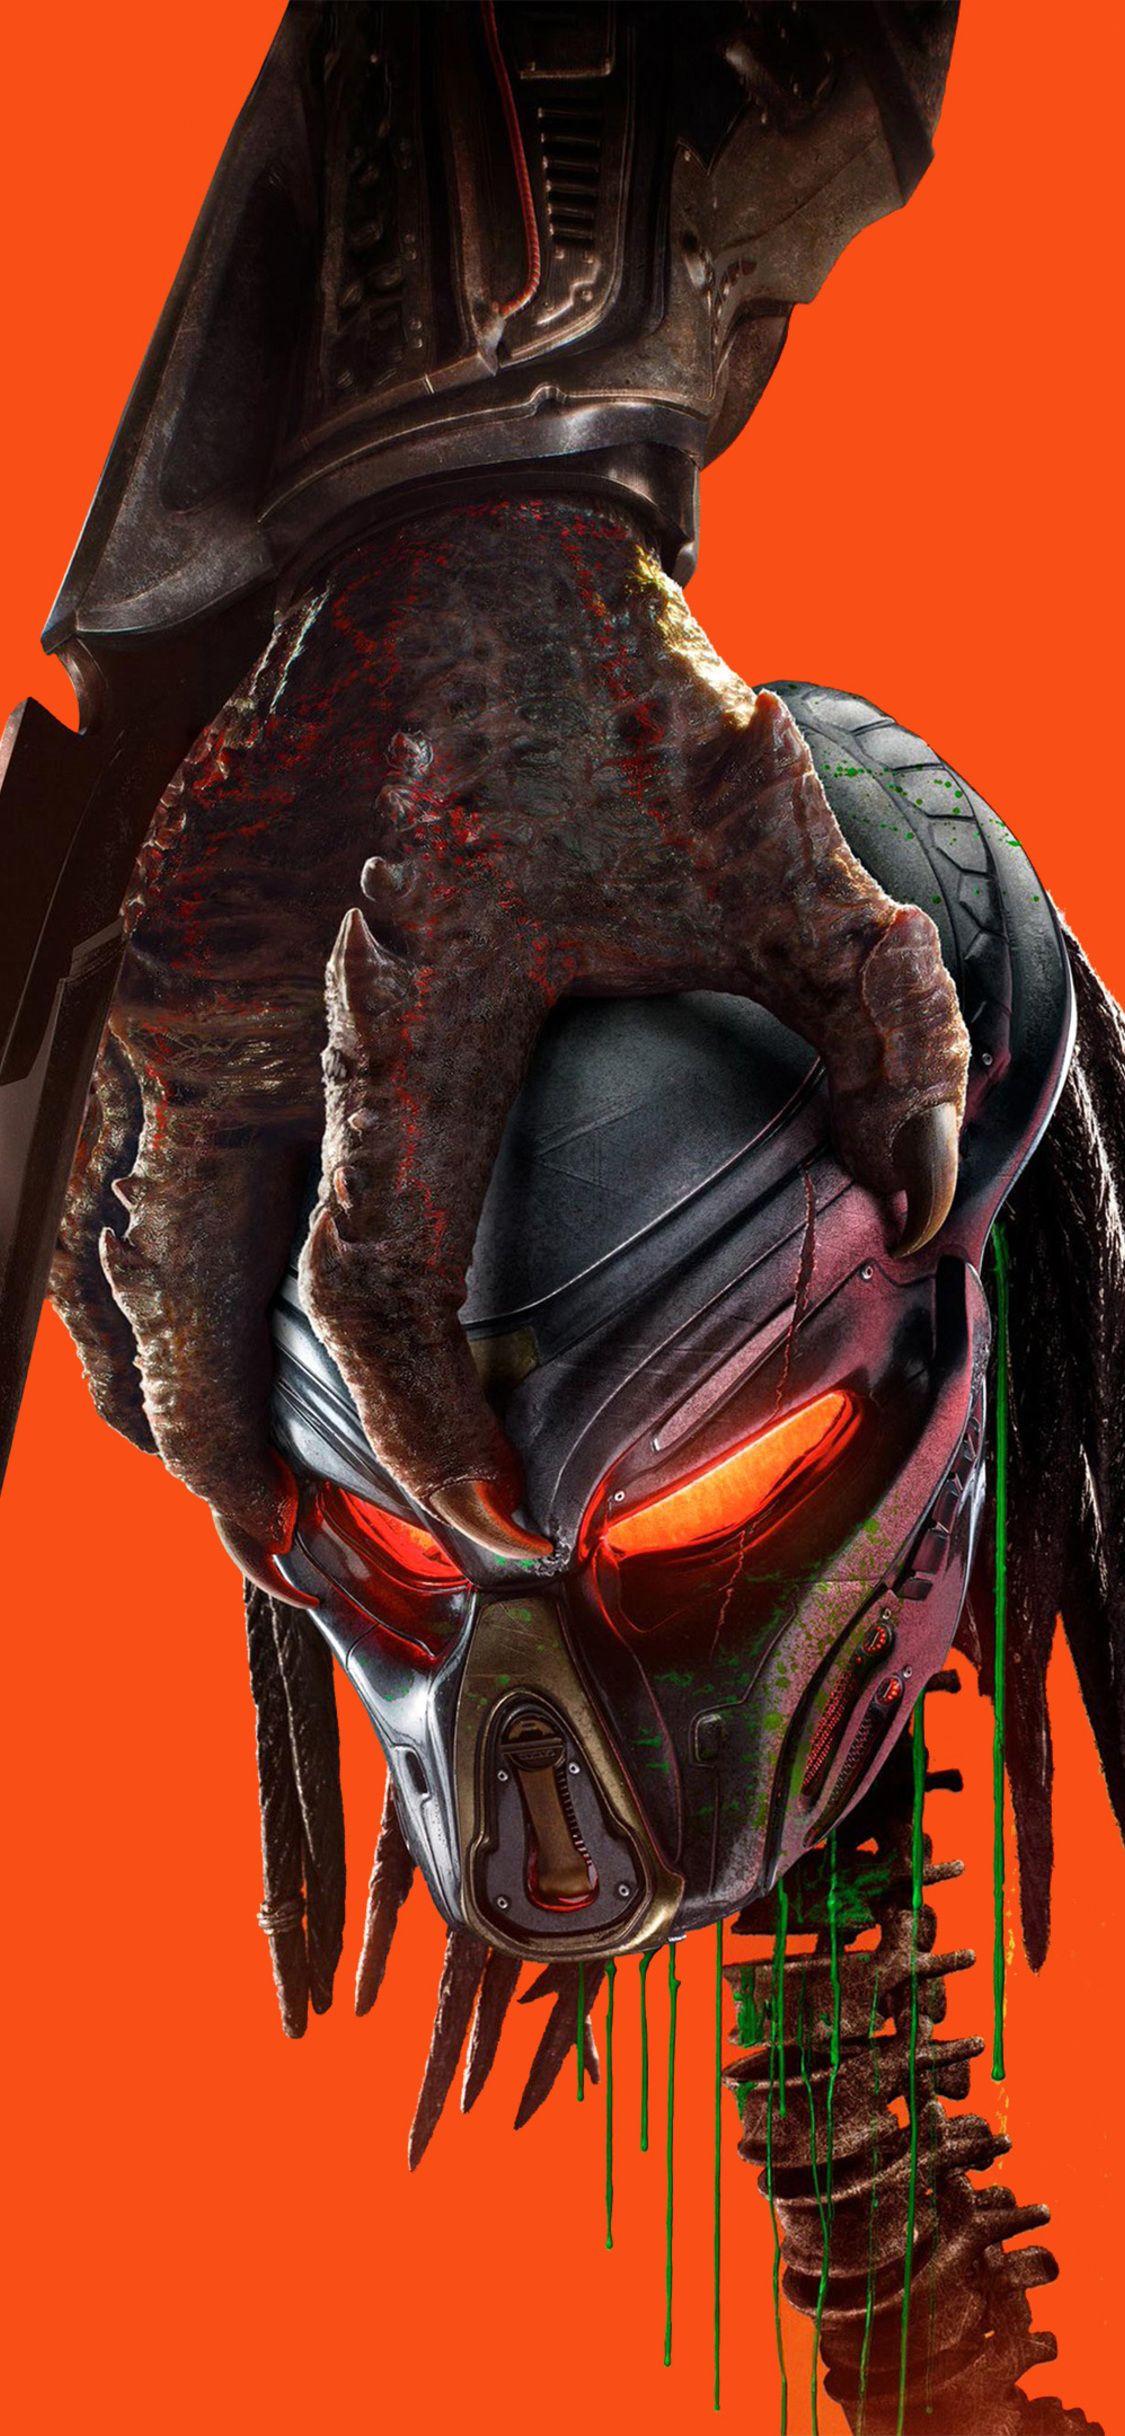 Download Predator wallpapers for mobile phone free Predator HD pictures